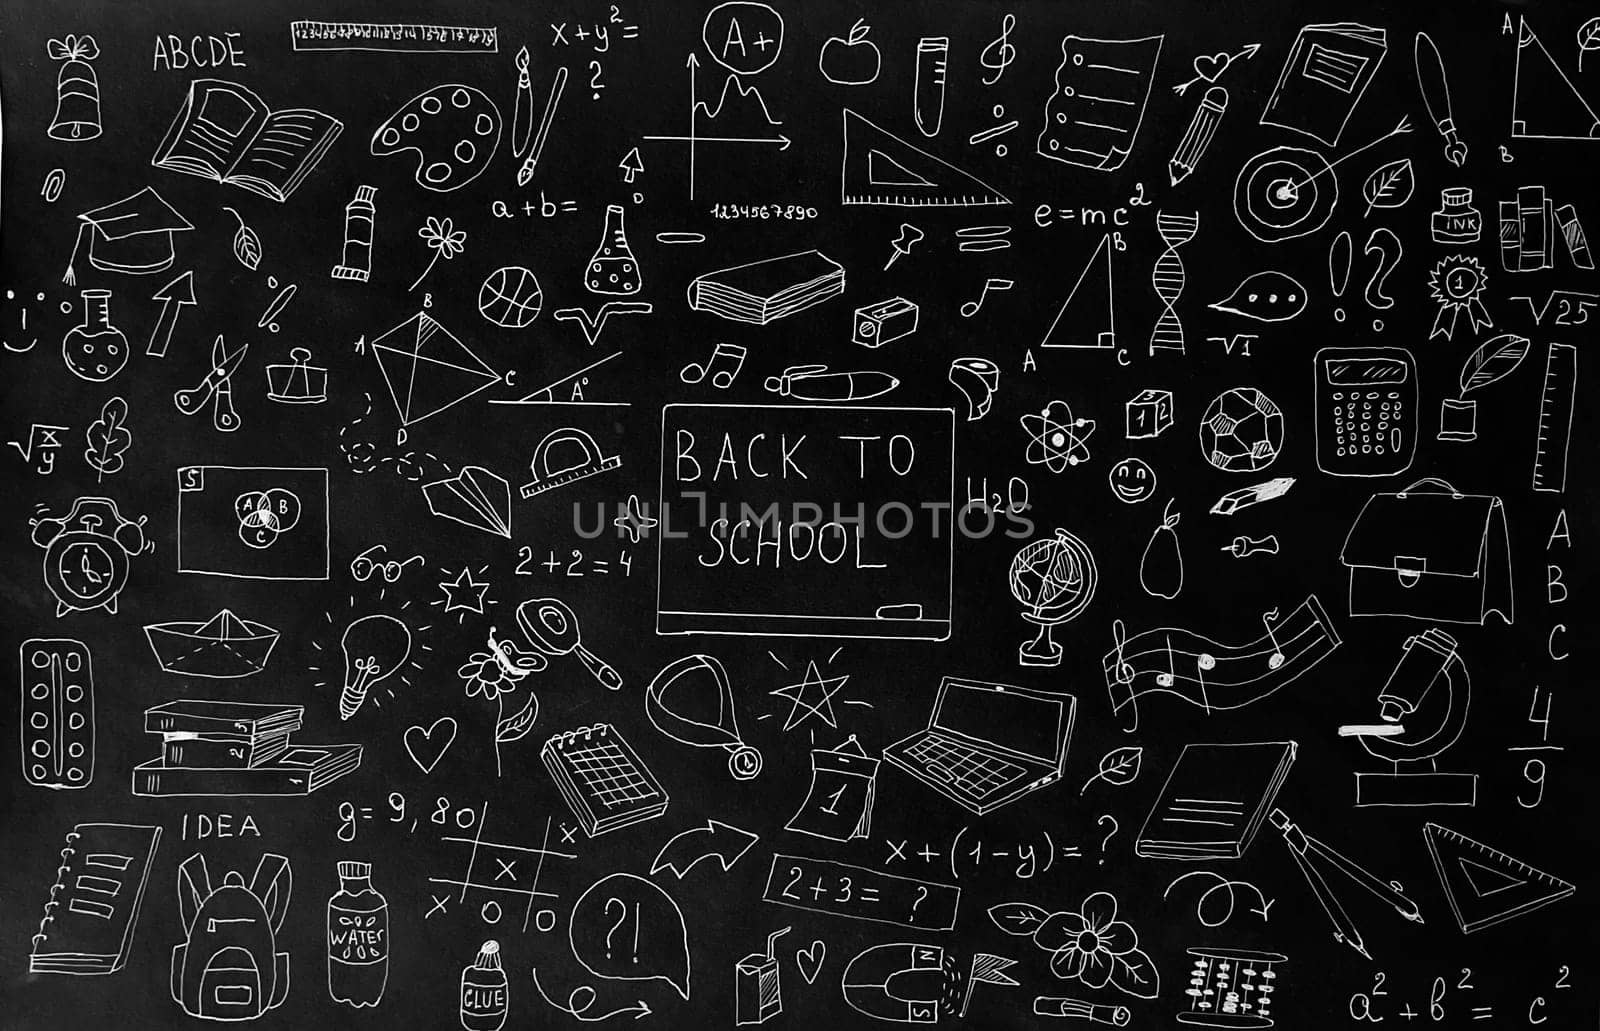 Back to school background from doodle illustrations. Let's go back to school doodle drawing.Paper background suitable for printing on fabric, wrapper. High quality illustration